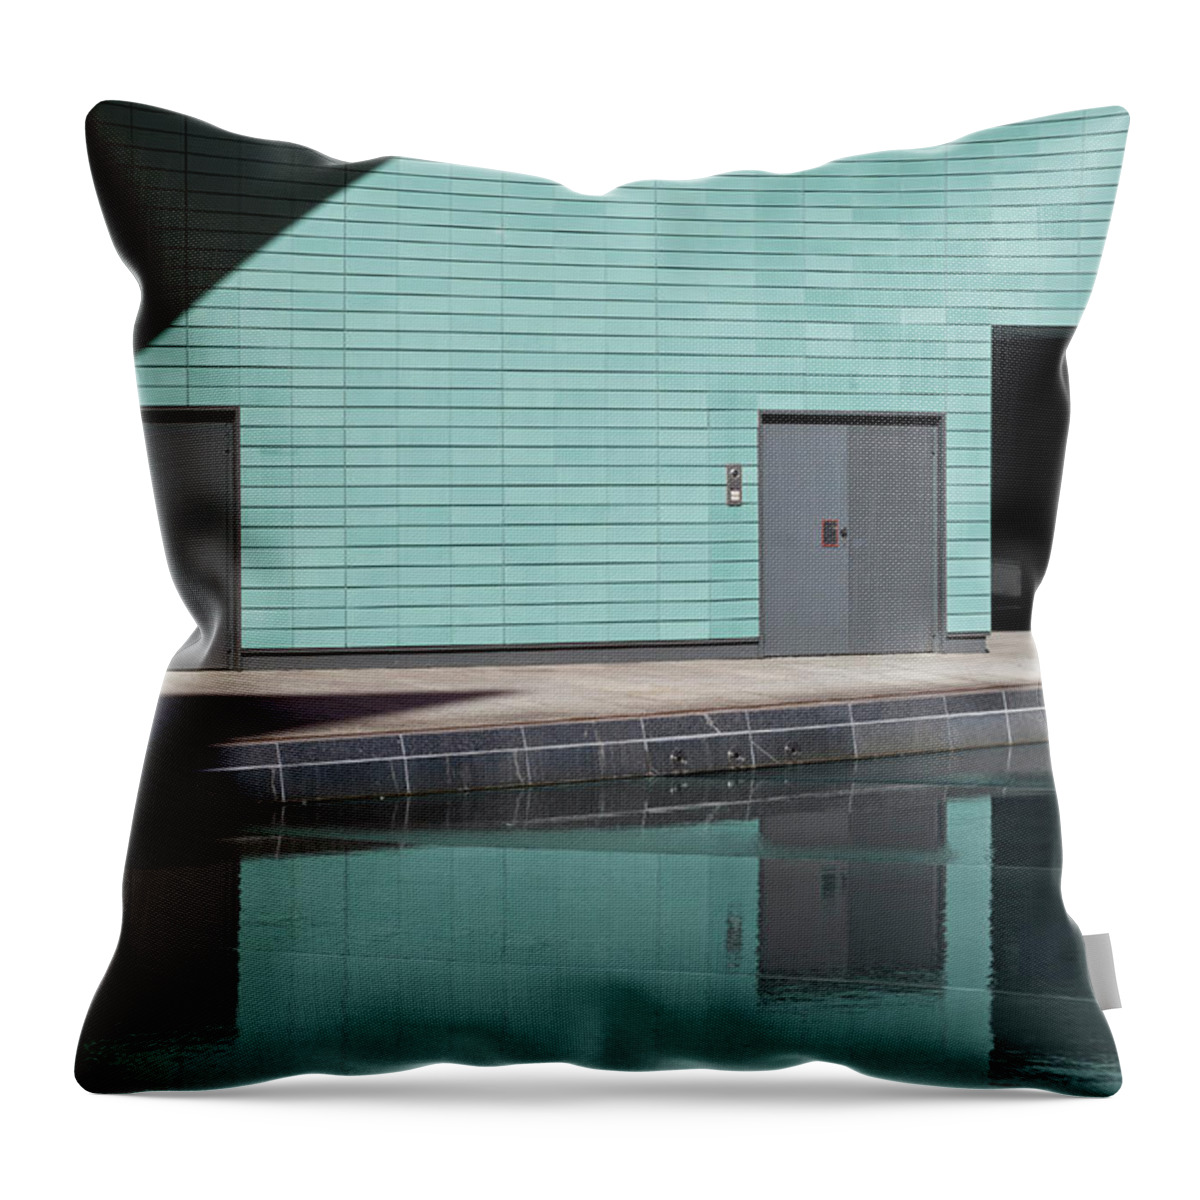 Shadow Throw Pillow featuring the photograph Merge Of Shapes With Water, Walls, And by Halfdark